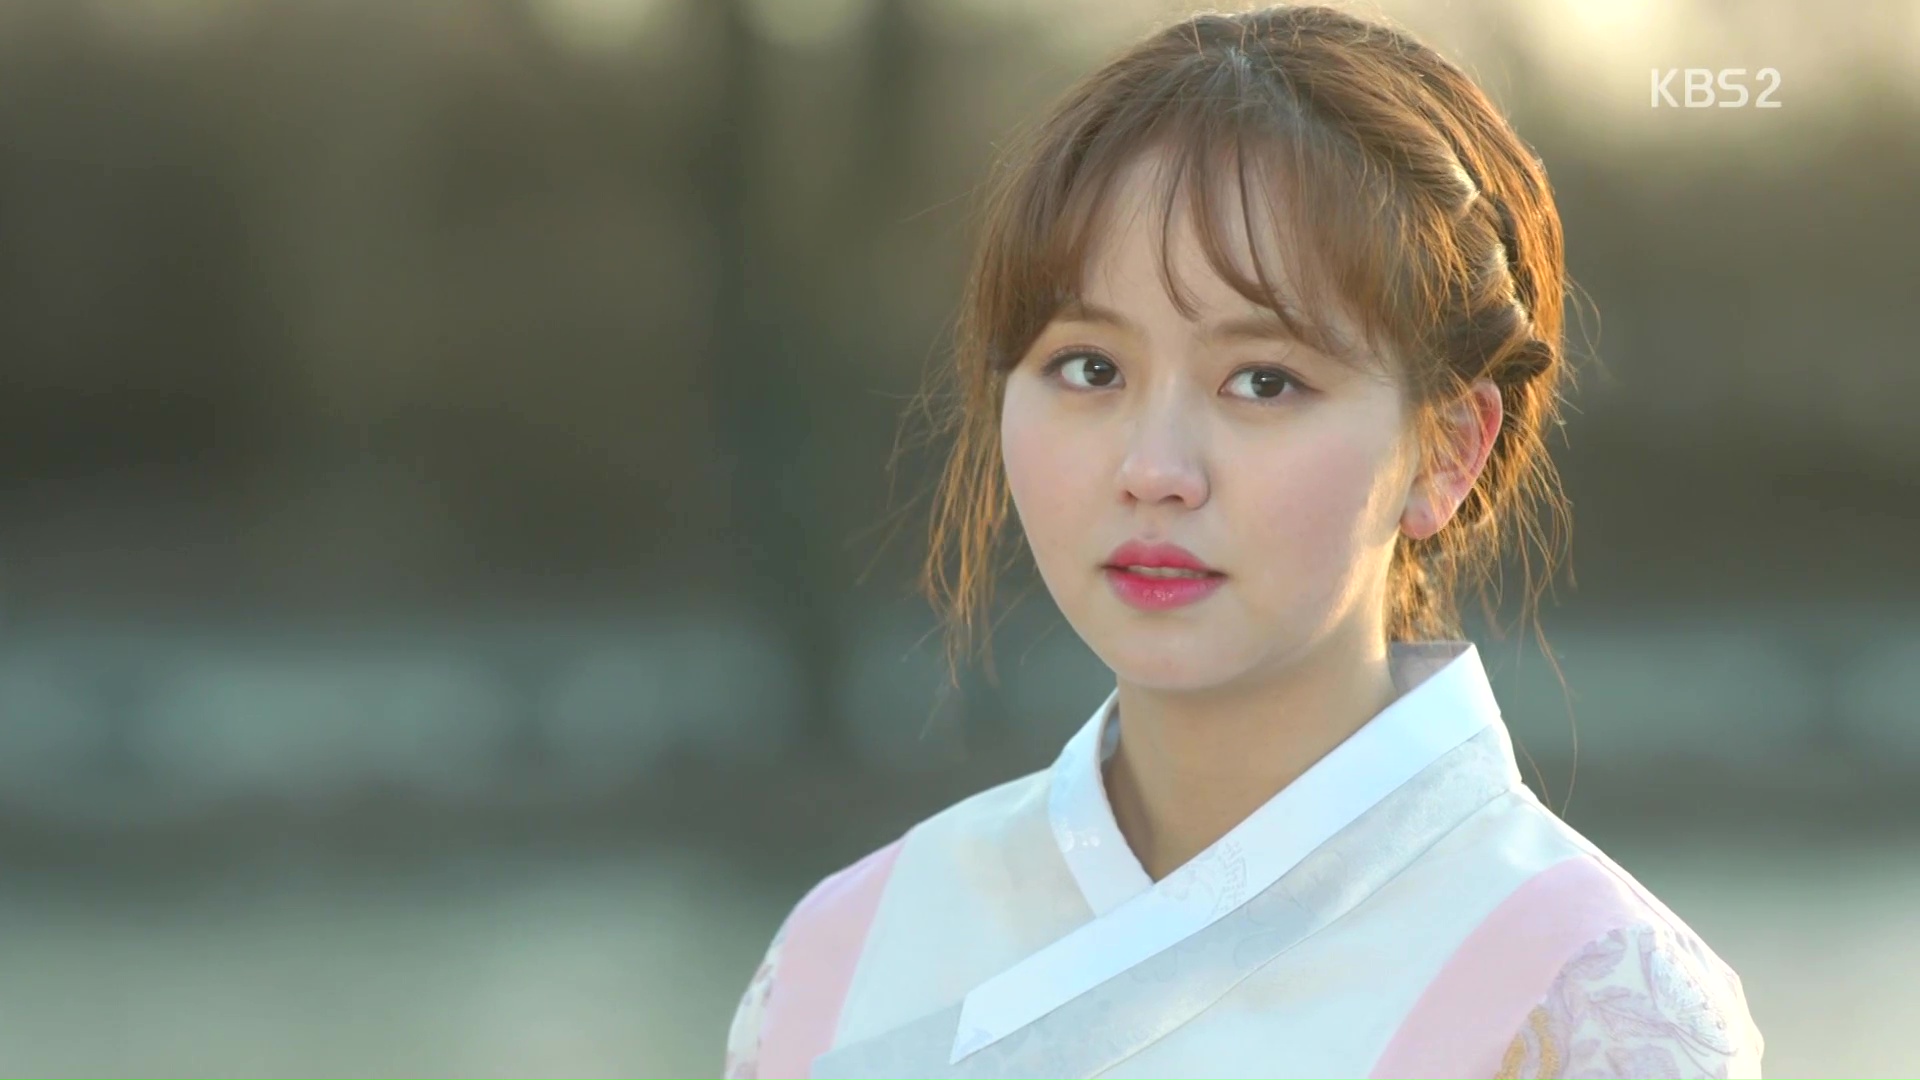 The Pd Calls For Her Before She Can Say Anything, And - Kim So Hyun Radio Romance Hanbo , HD Wallpaper & Backgrounds